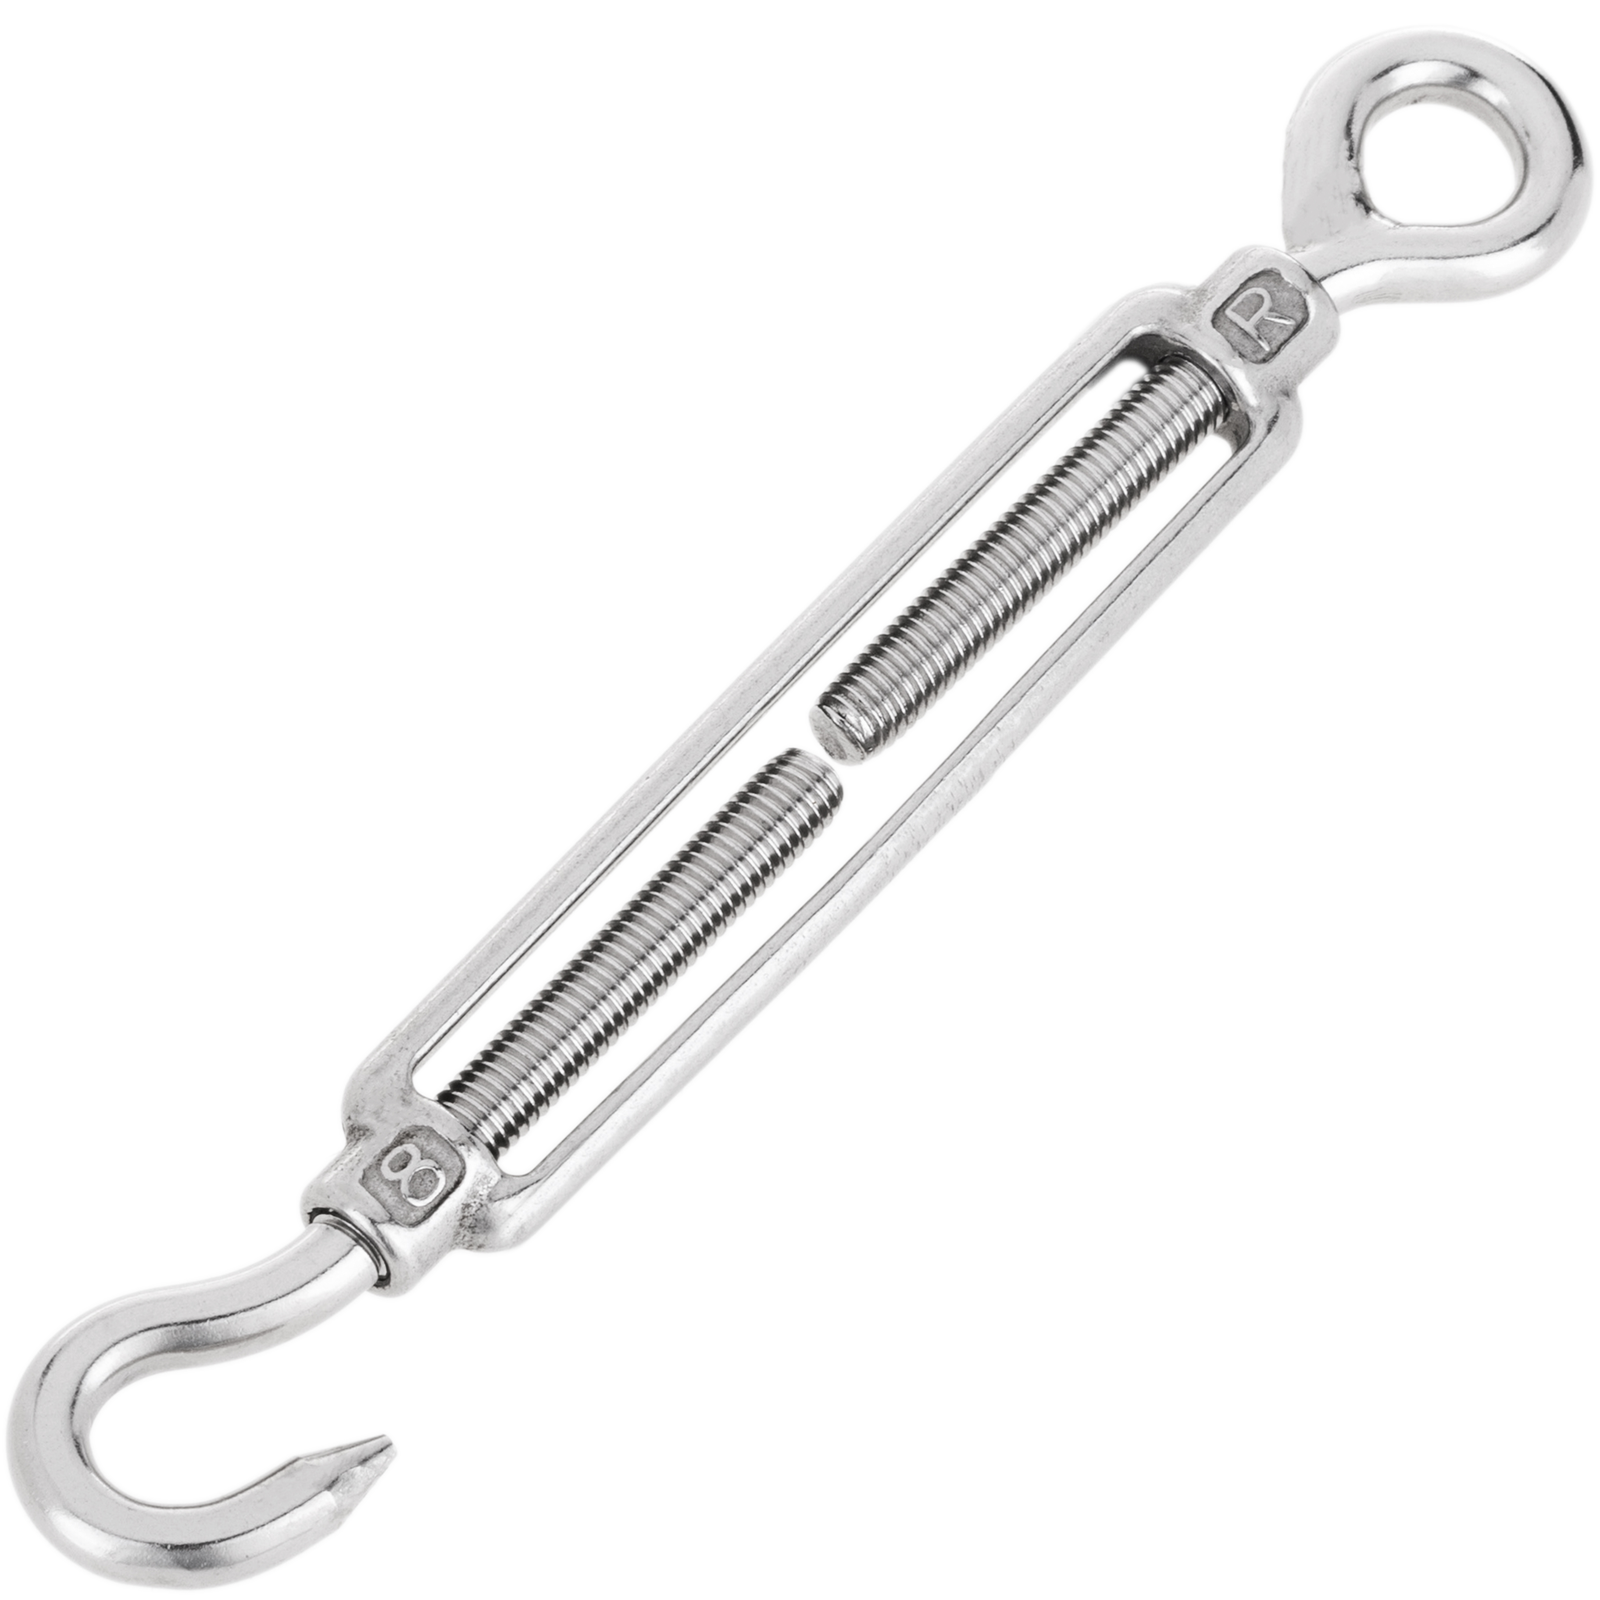 Barrier Chain, Stainless Steel, Welded Link, Multiple Lengths, LW-964